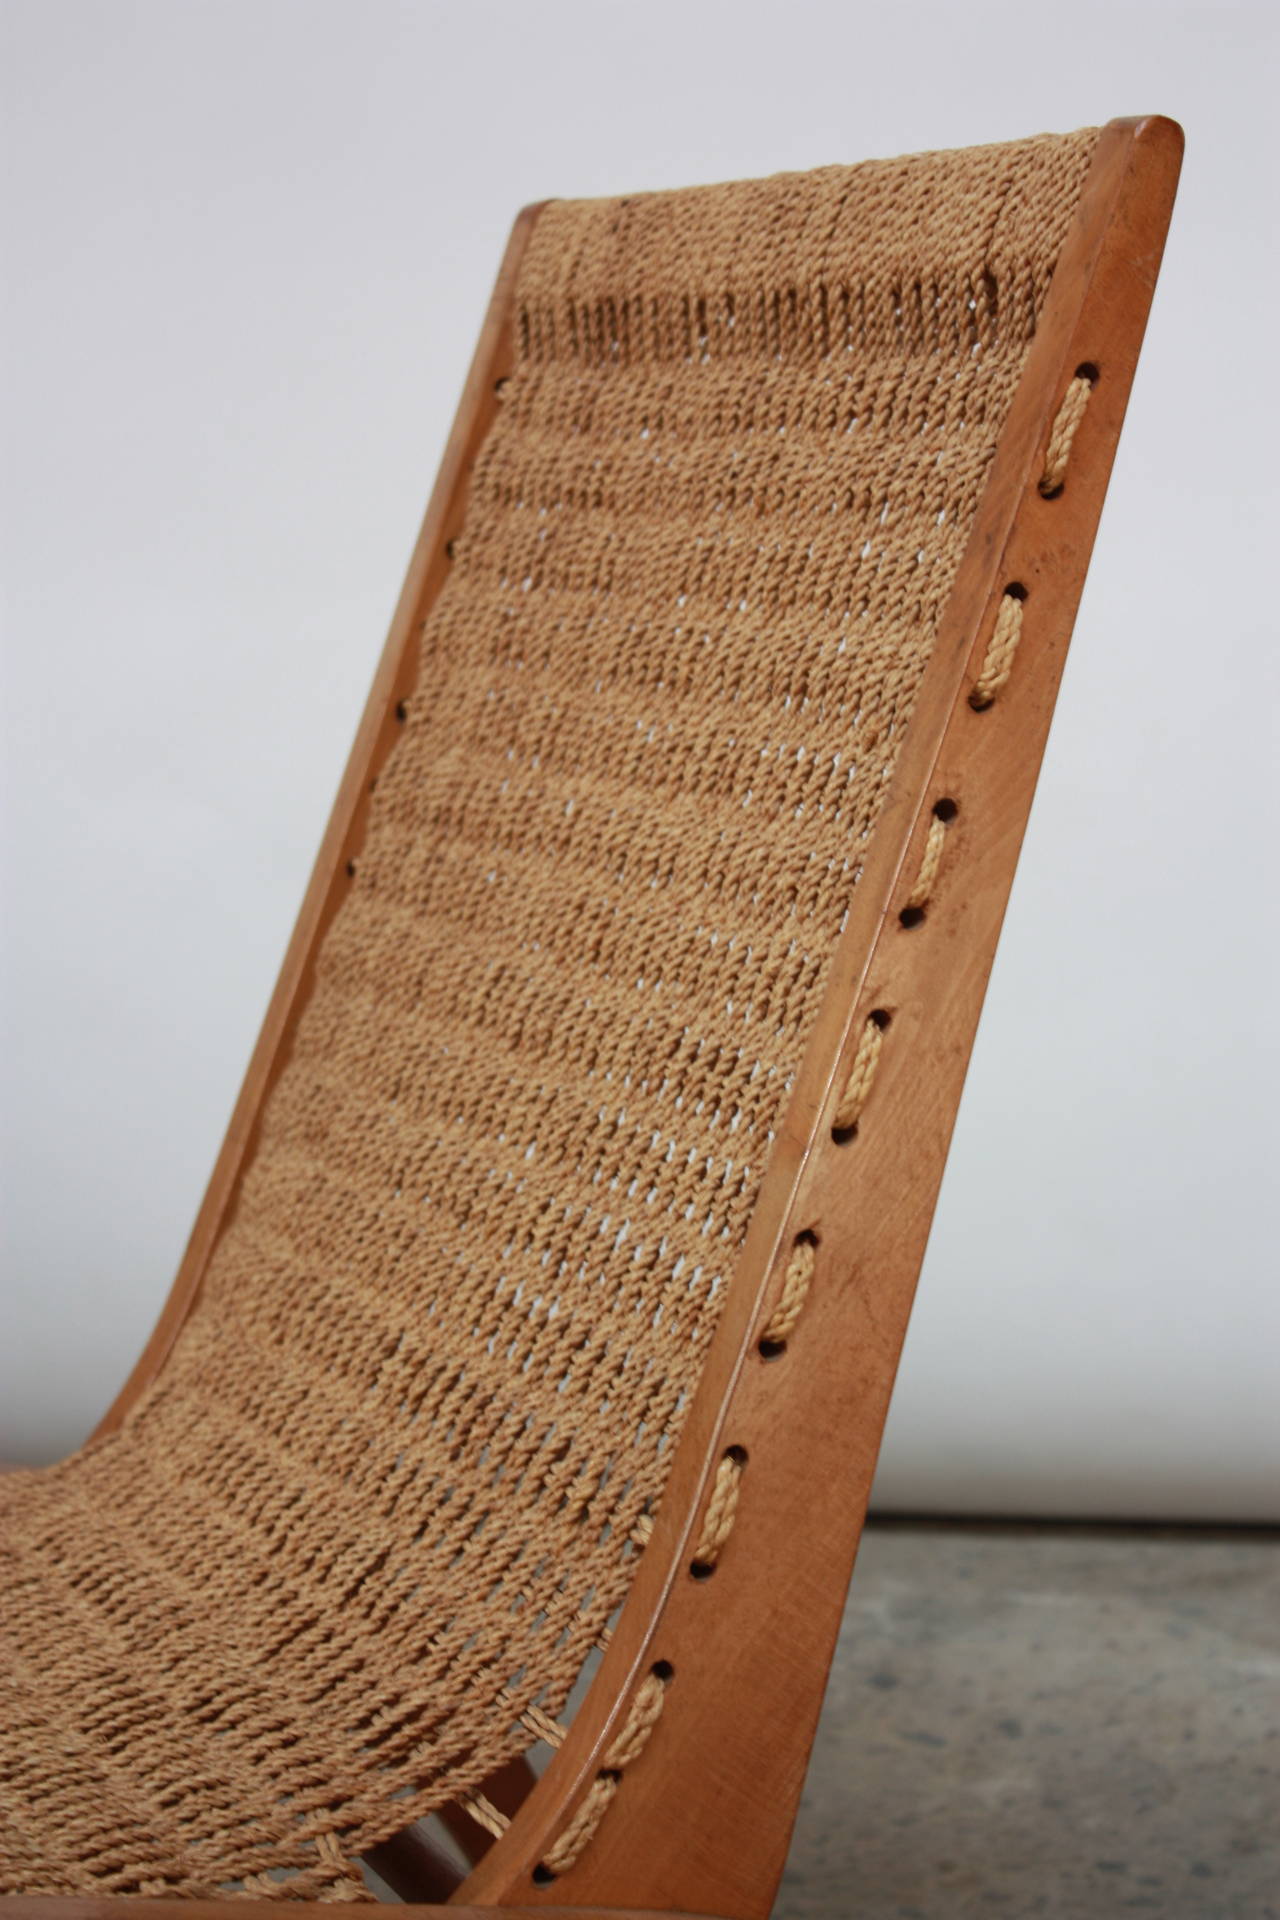 This unique Scandinavian accent chair features a woven rope seat with a carved wood frame. The design is reminiscent of Edward Durell Stone's seating design for Fulbright, but the piece is unsigned and unattributed.